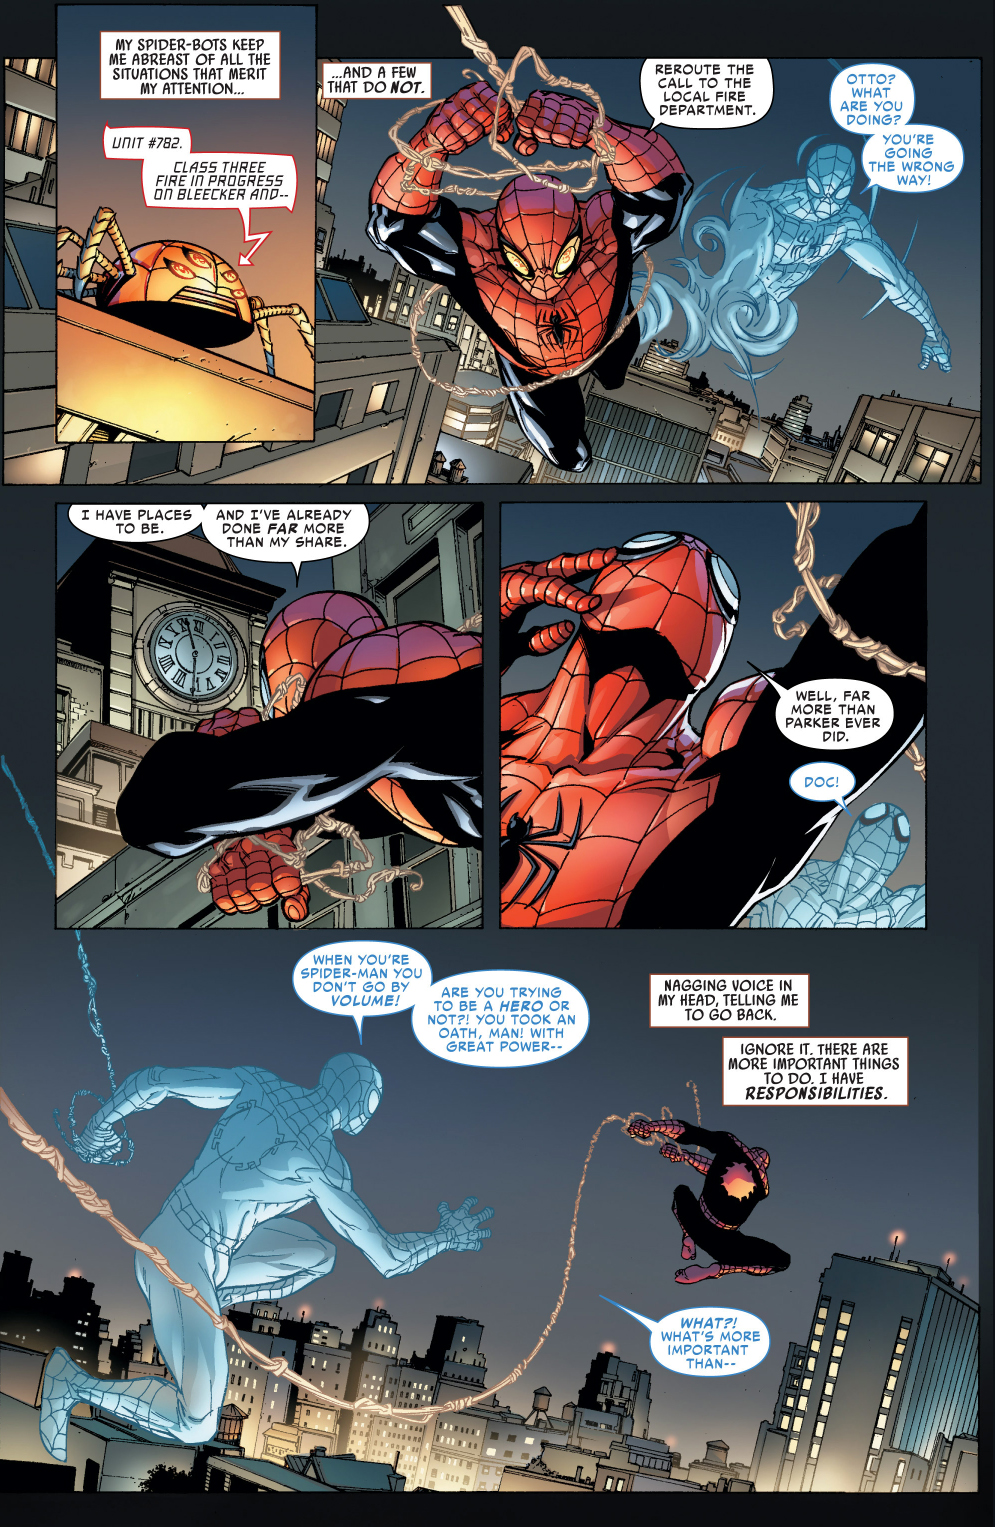 superior spider-man's crime fighting results